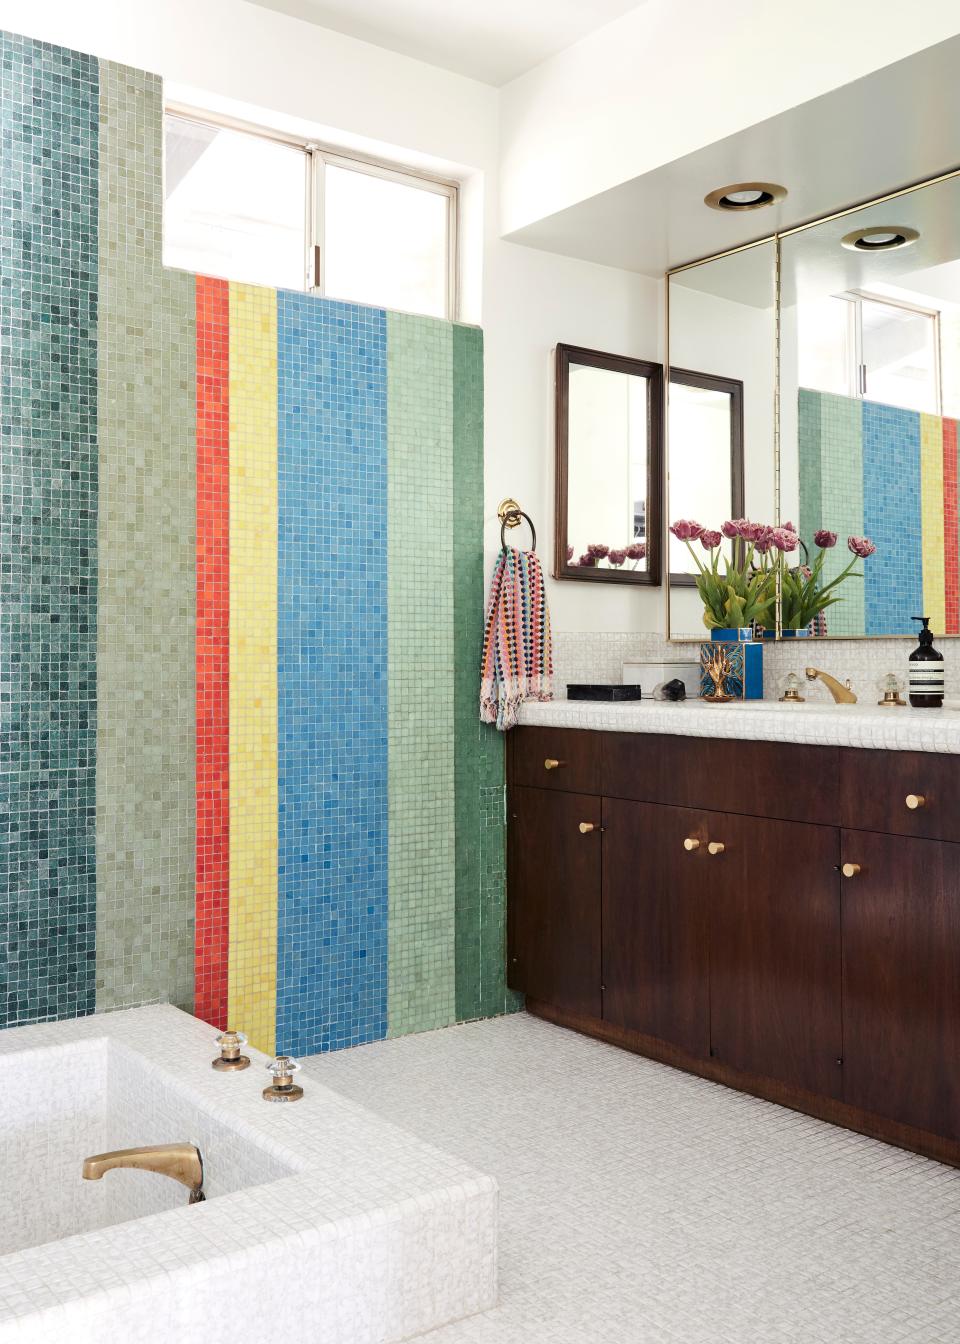 A colorful hand towel sourced from Amazon ties in the playful pattern of the tiles. But the play on tile doesn’t stop there. “I love this tile so much, and so because I’m insane, I bought a vintage Dior bathrobe to match,” Colman jokes.